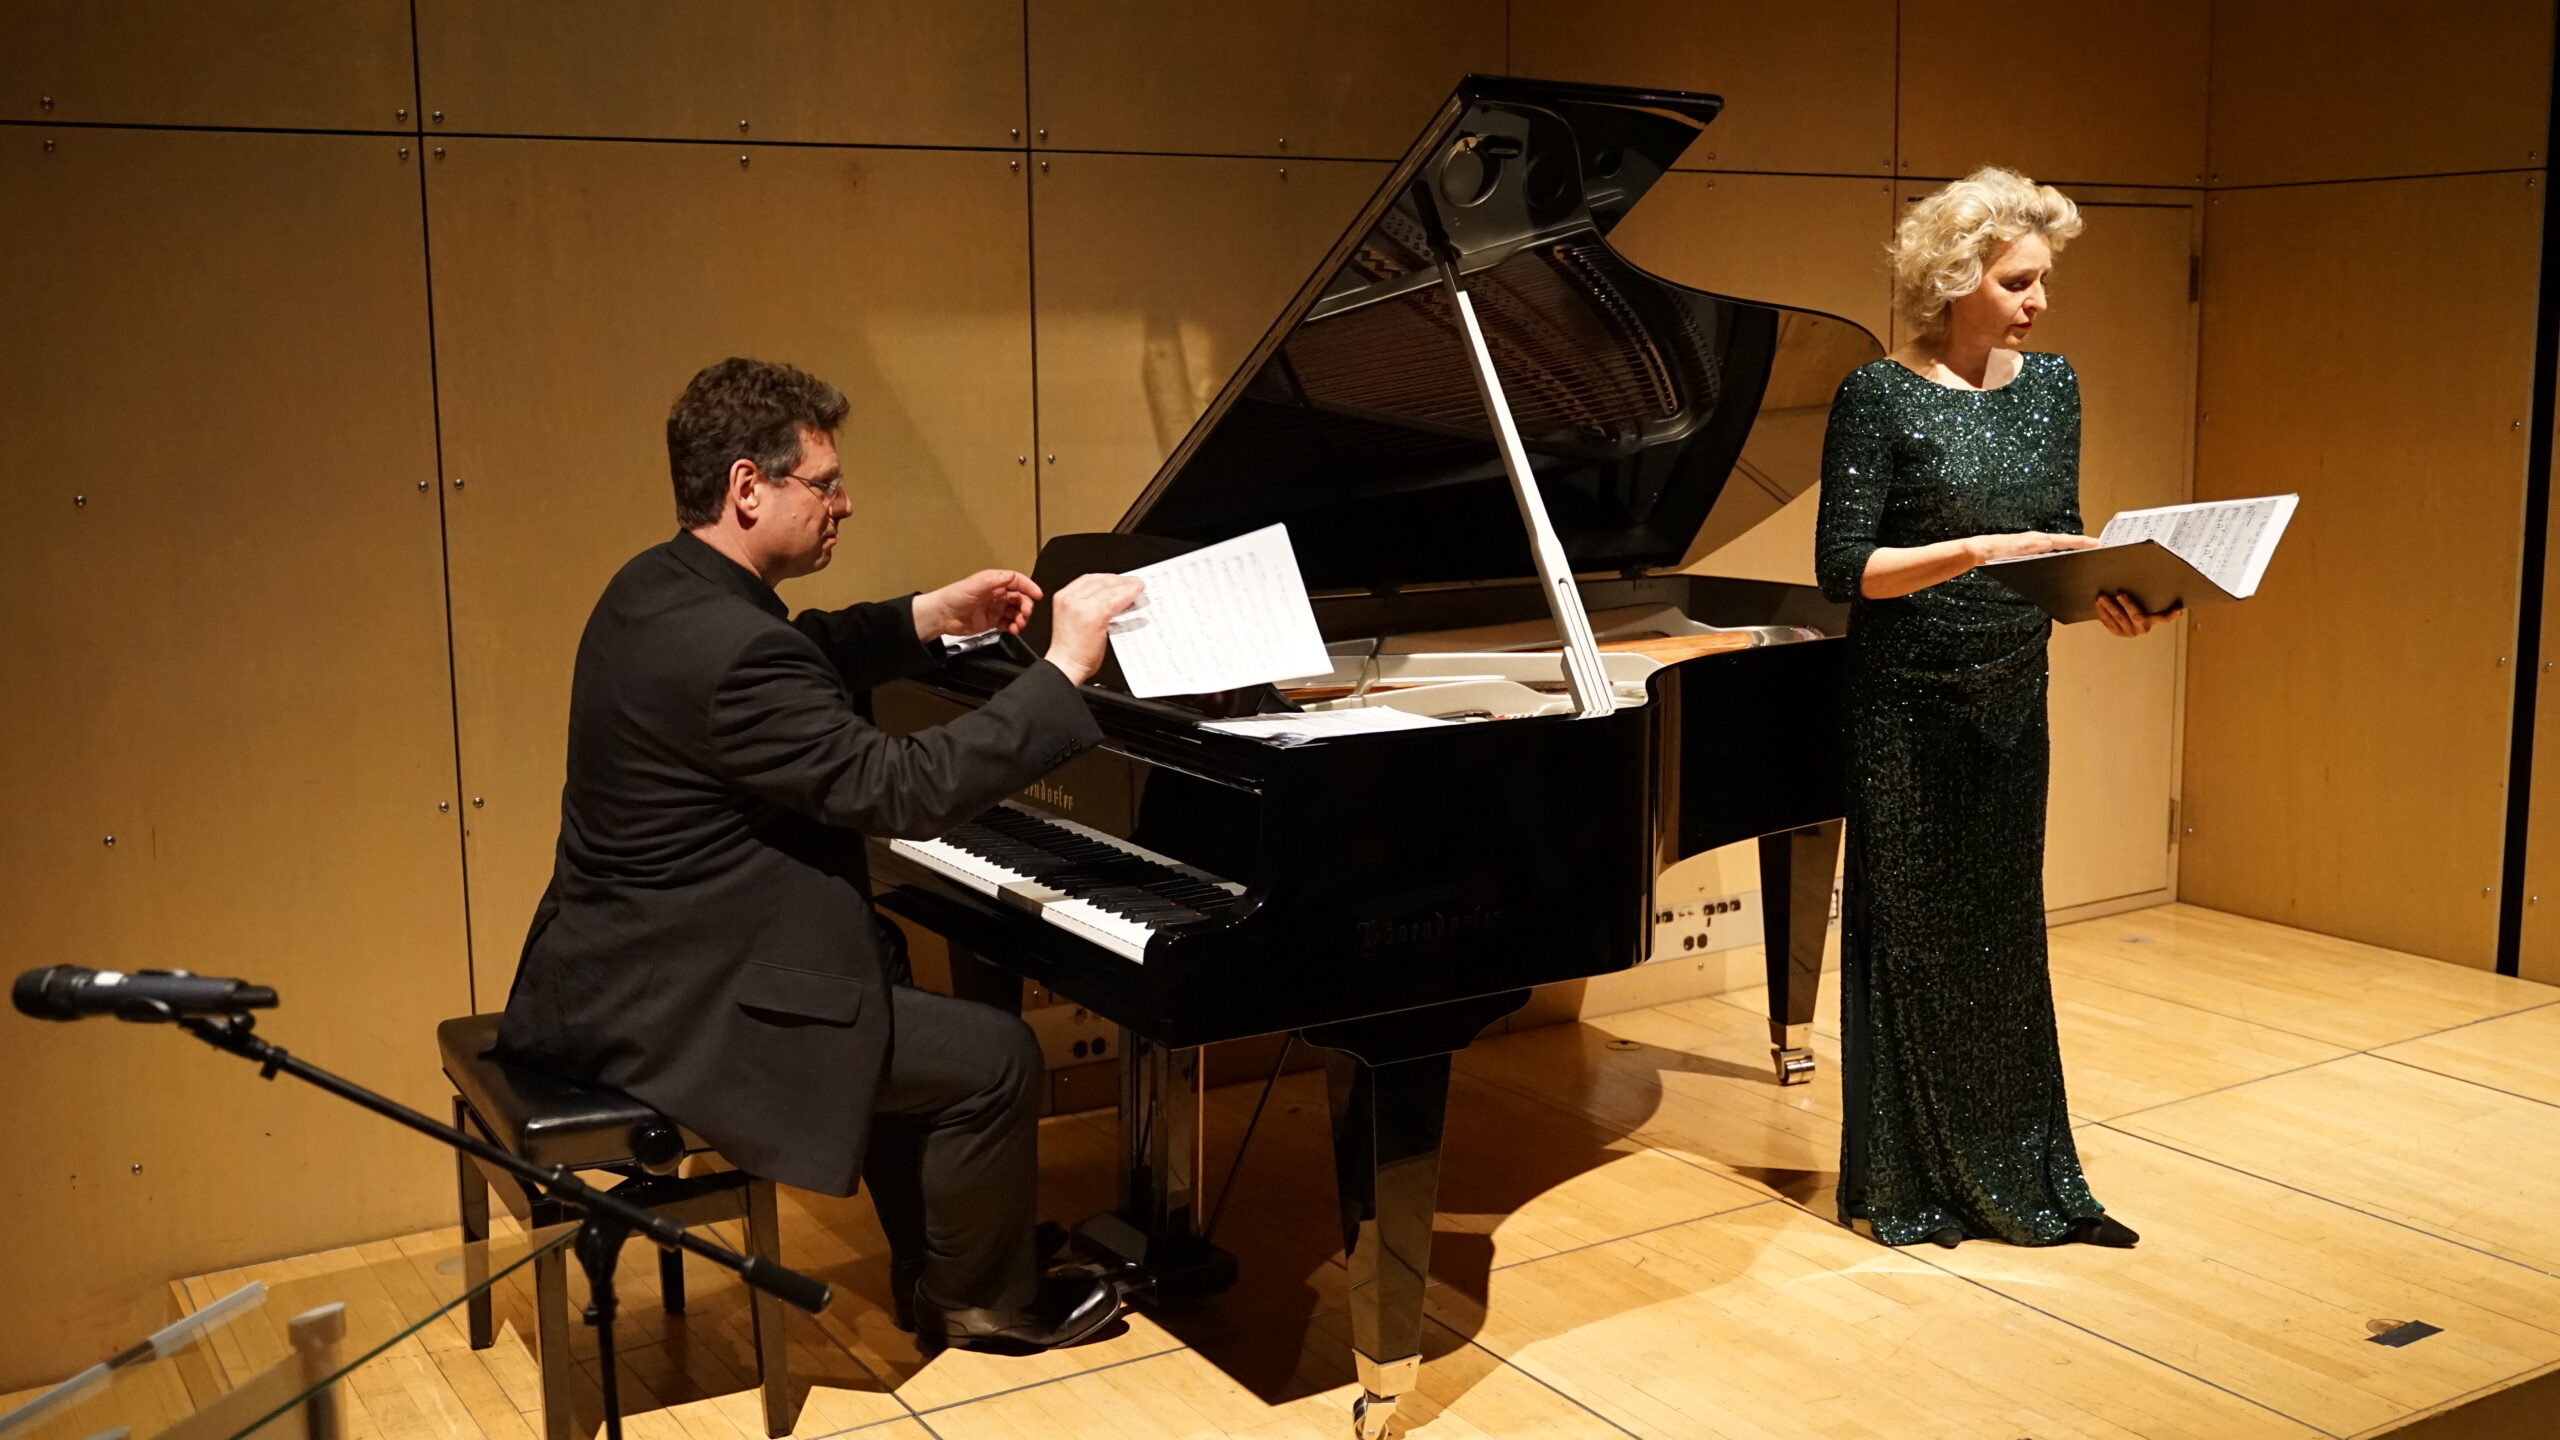 Evening Concert performed by Soprano Lydia Rathkolb (right), former soloist Vienna State Opera and pianist Thomas Lausmann (left), The Metropolitan Opera